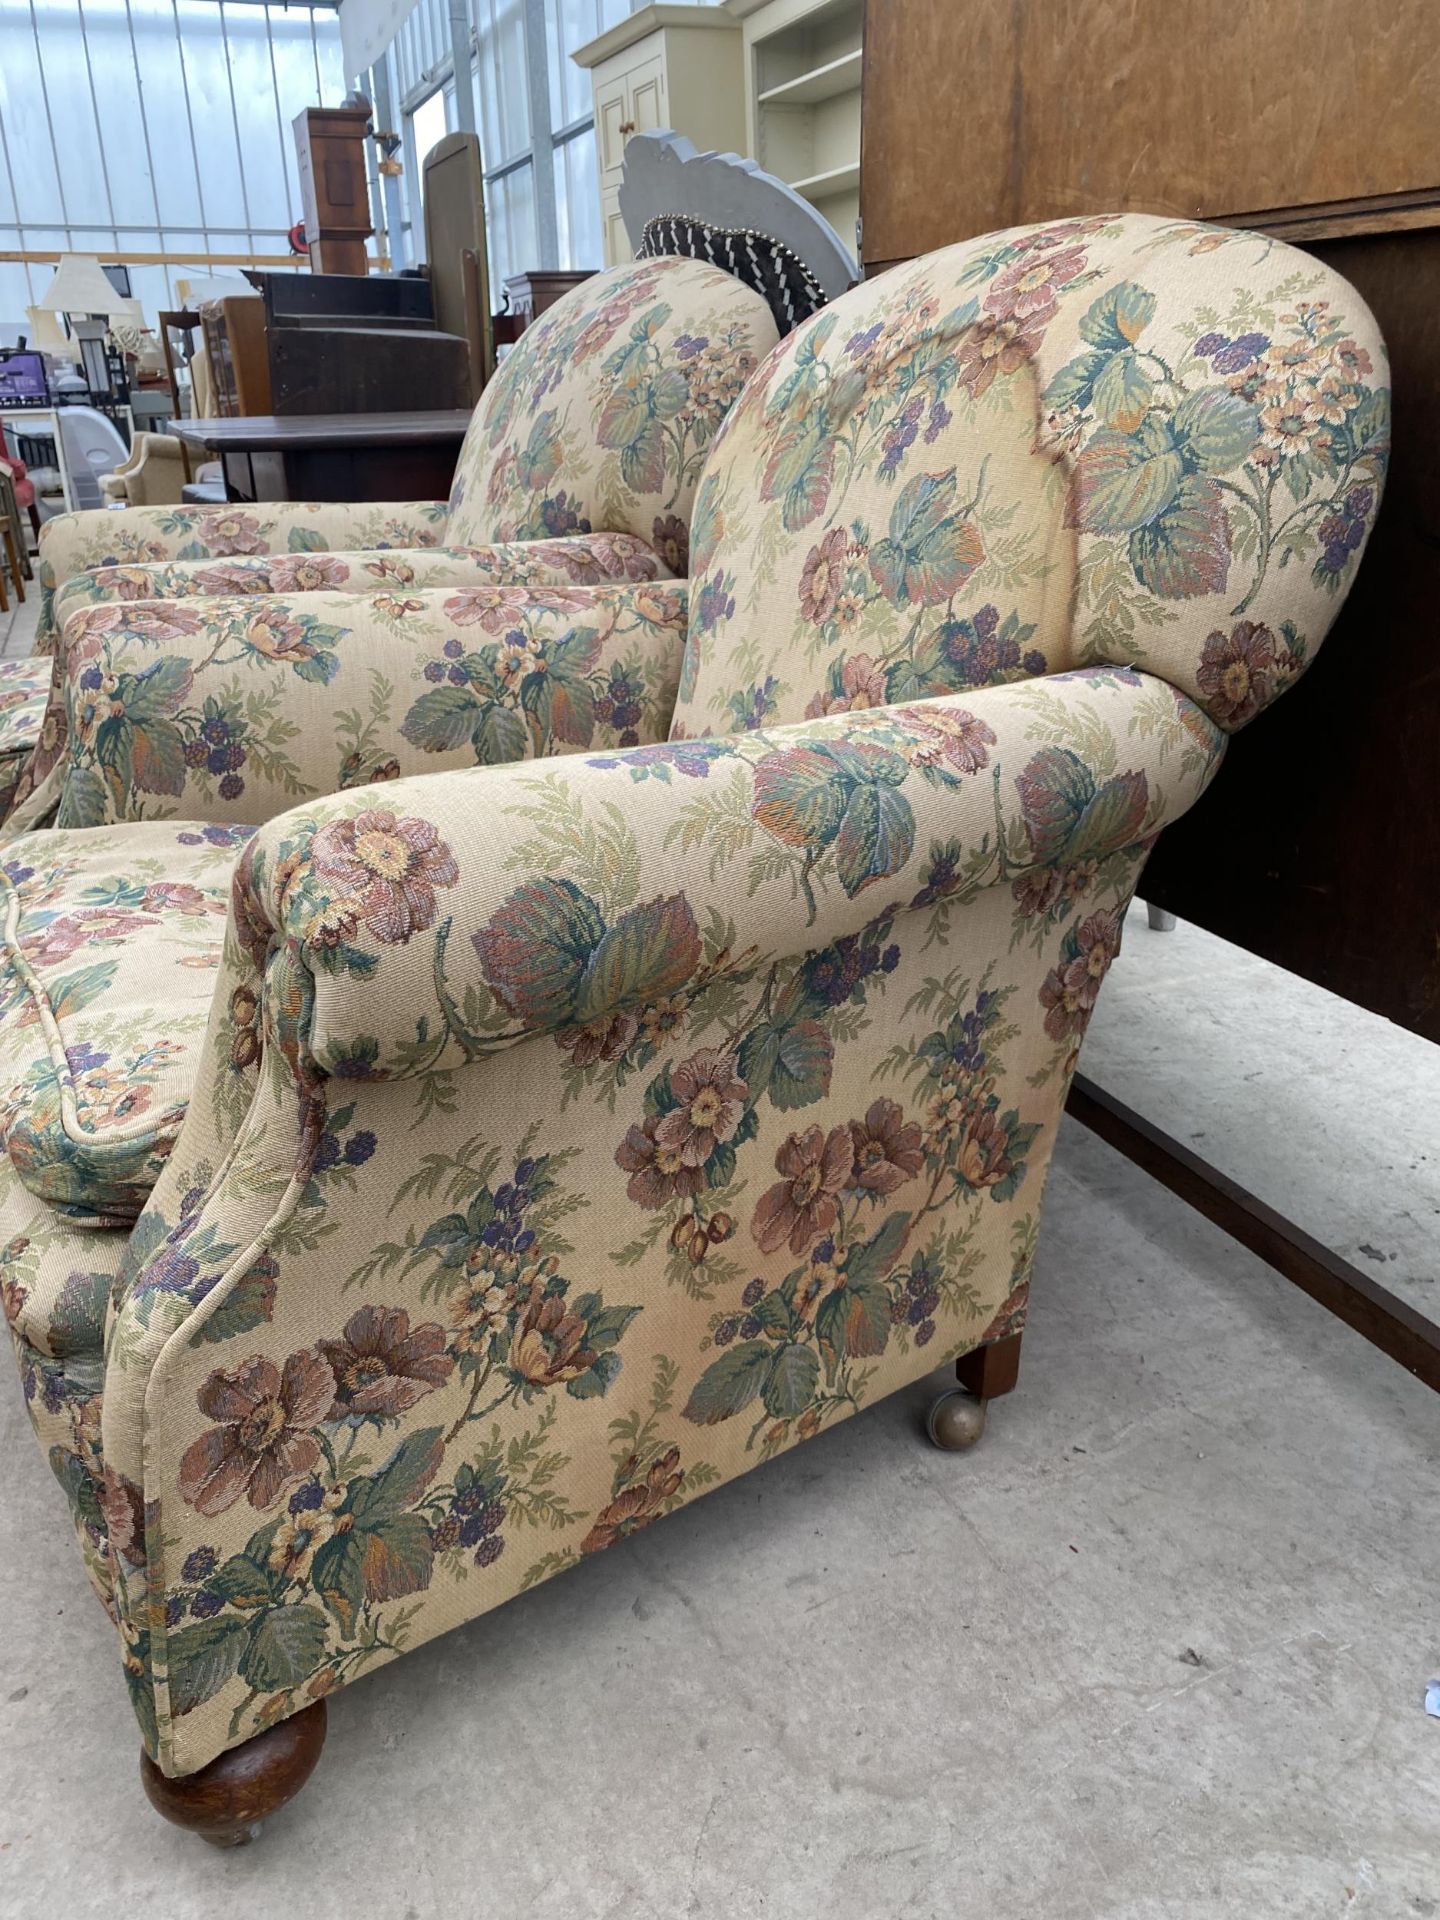 A PAIR OF EARLY 20TH CENTURY SPRUNG AND UPHOLSTERED EASY CHAIRS ON BUN FEET WITH A SPARE LOOSE COVER - Image 3 of 4